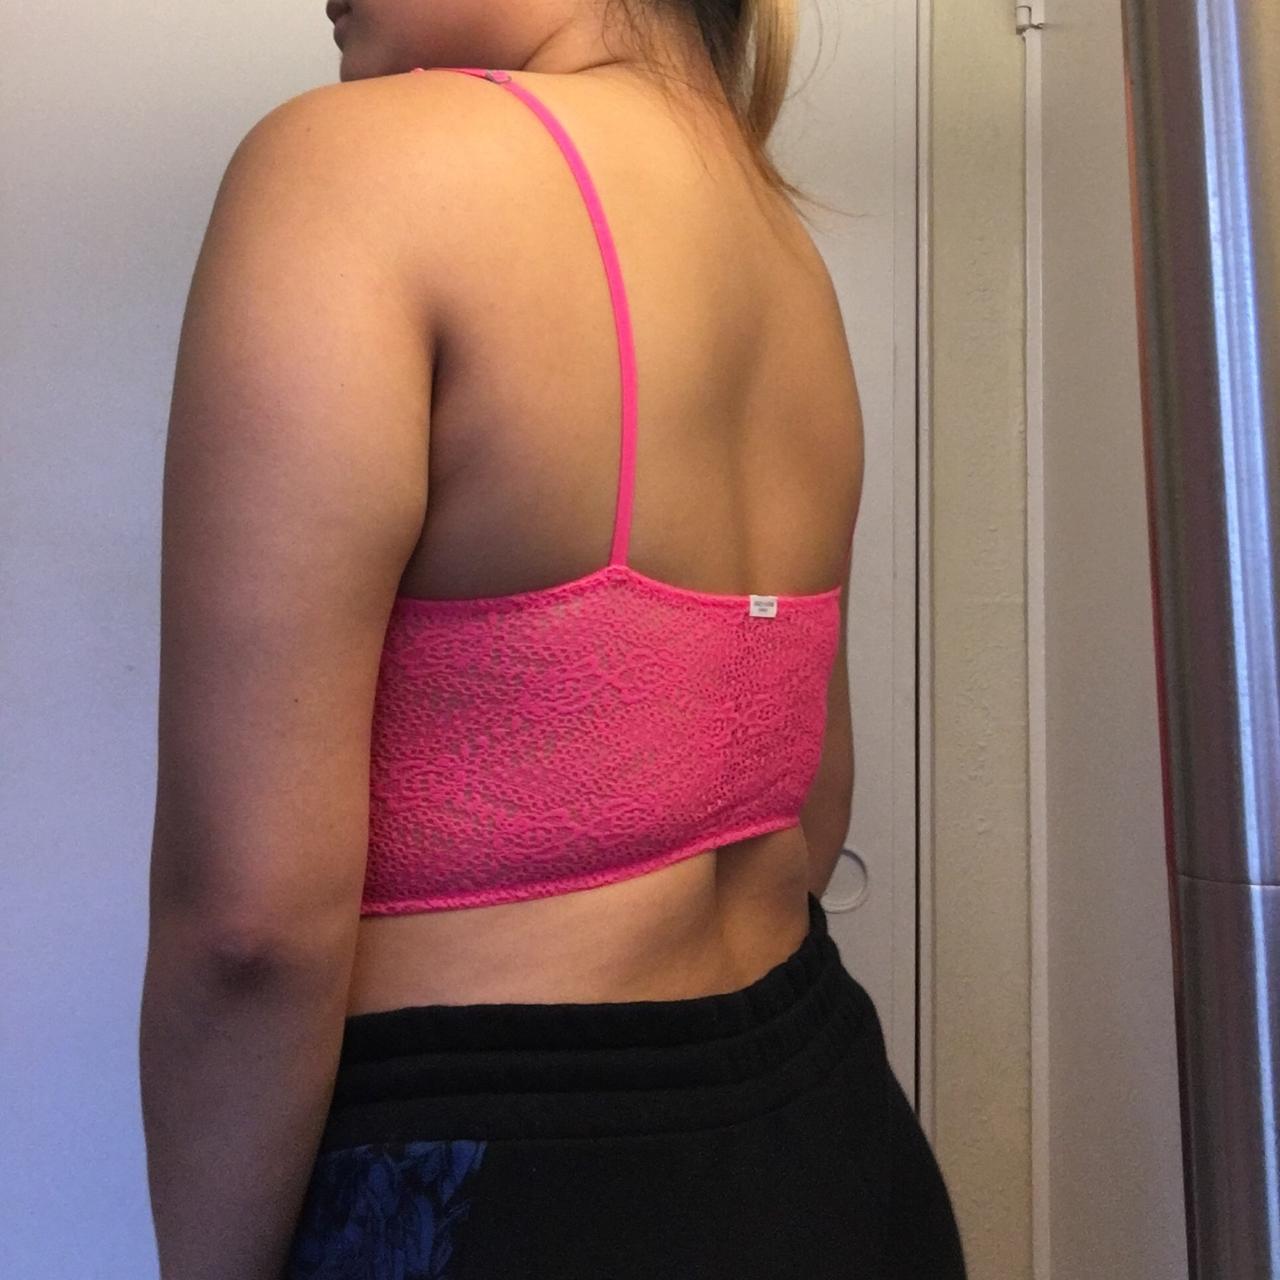 Hot pink Gilly Hicks bra top Is a little see through - Depop